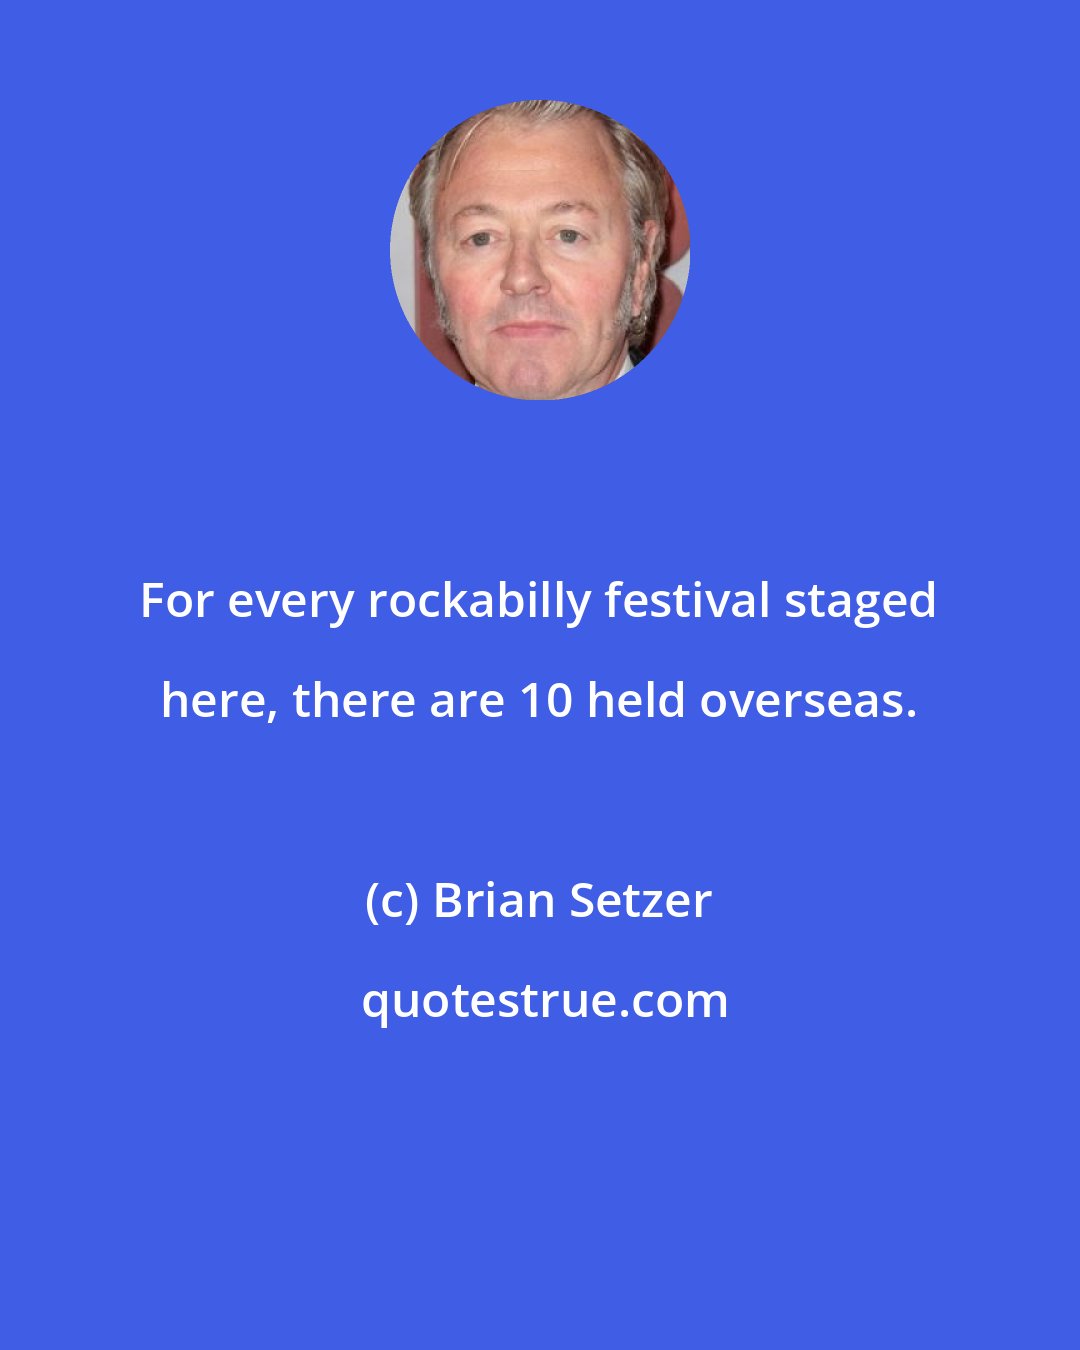 Brian Setzer: For every rockabilly festival staged here, there are 10 held overseas.